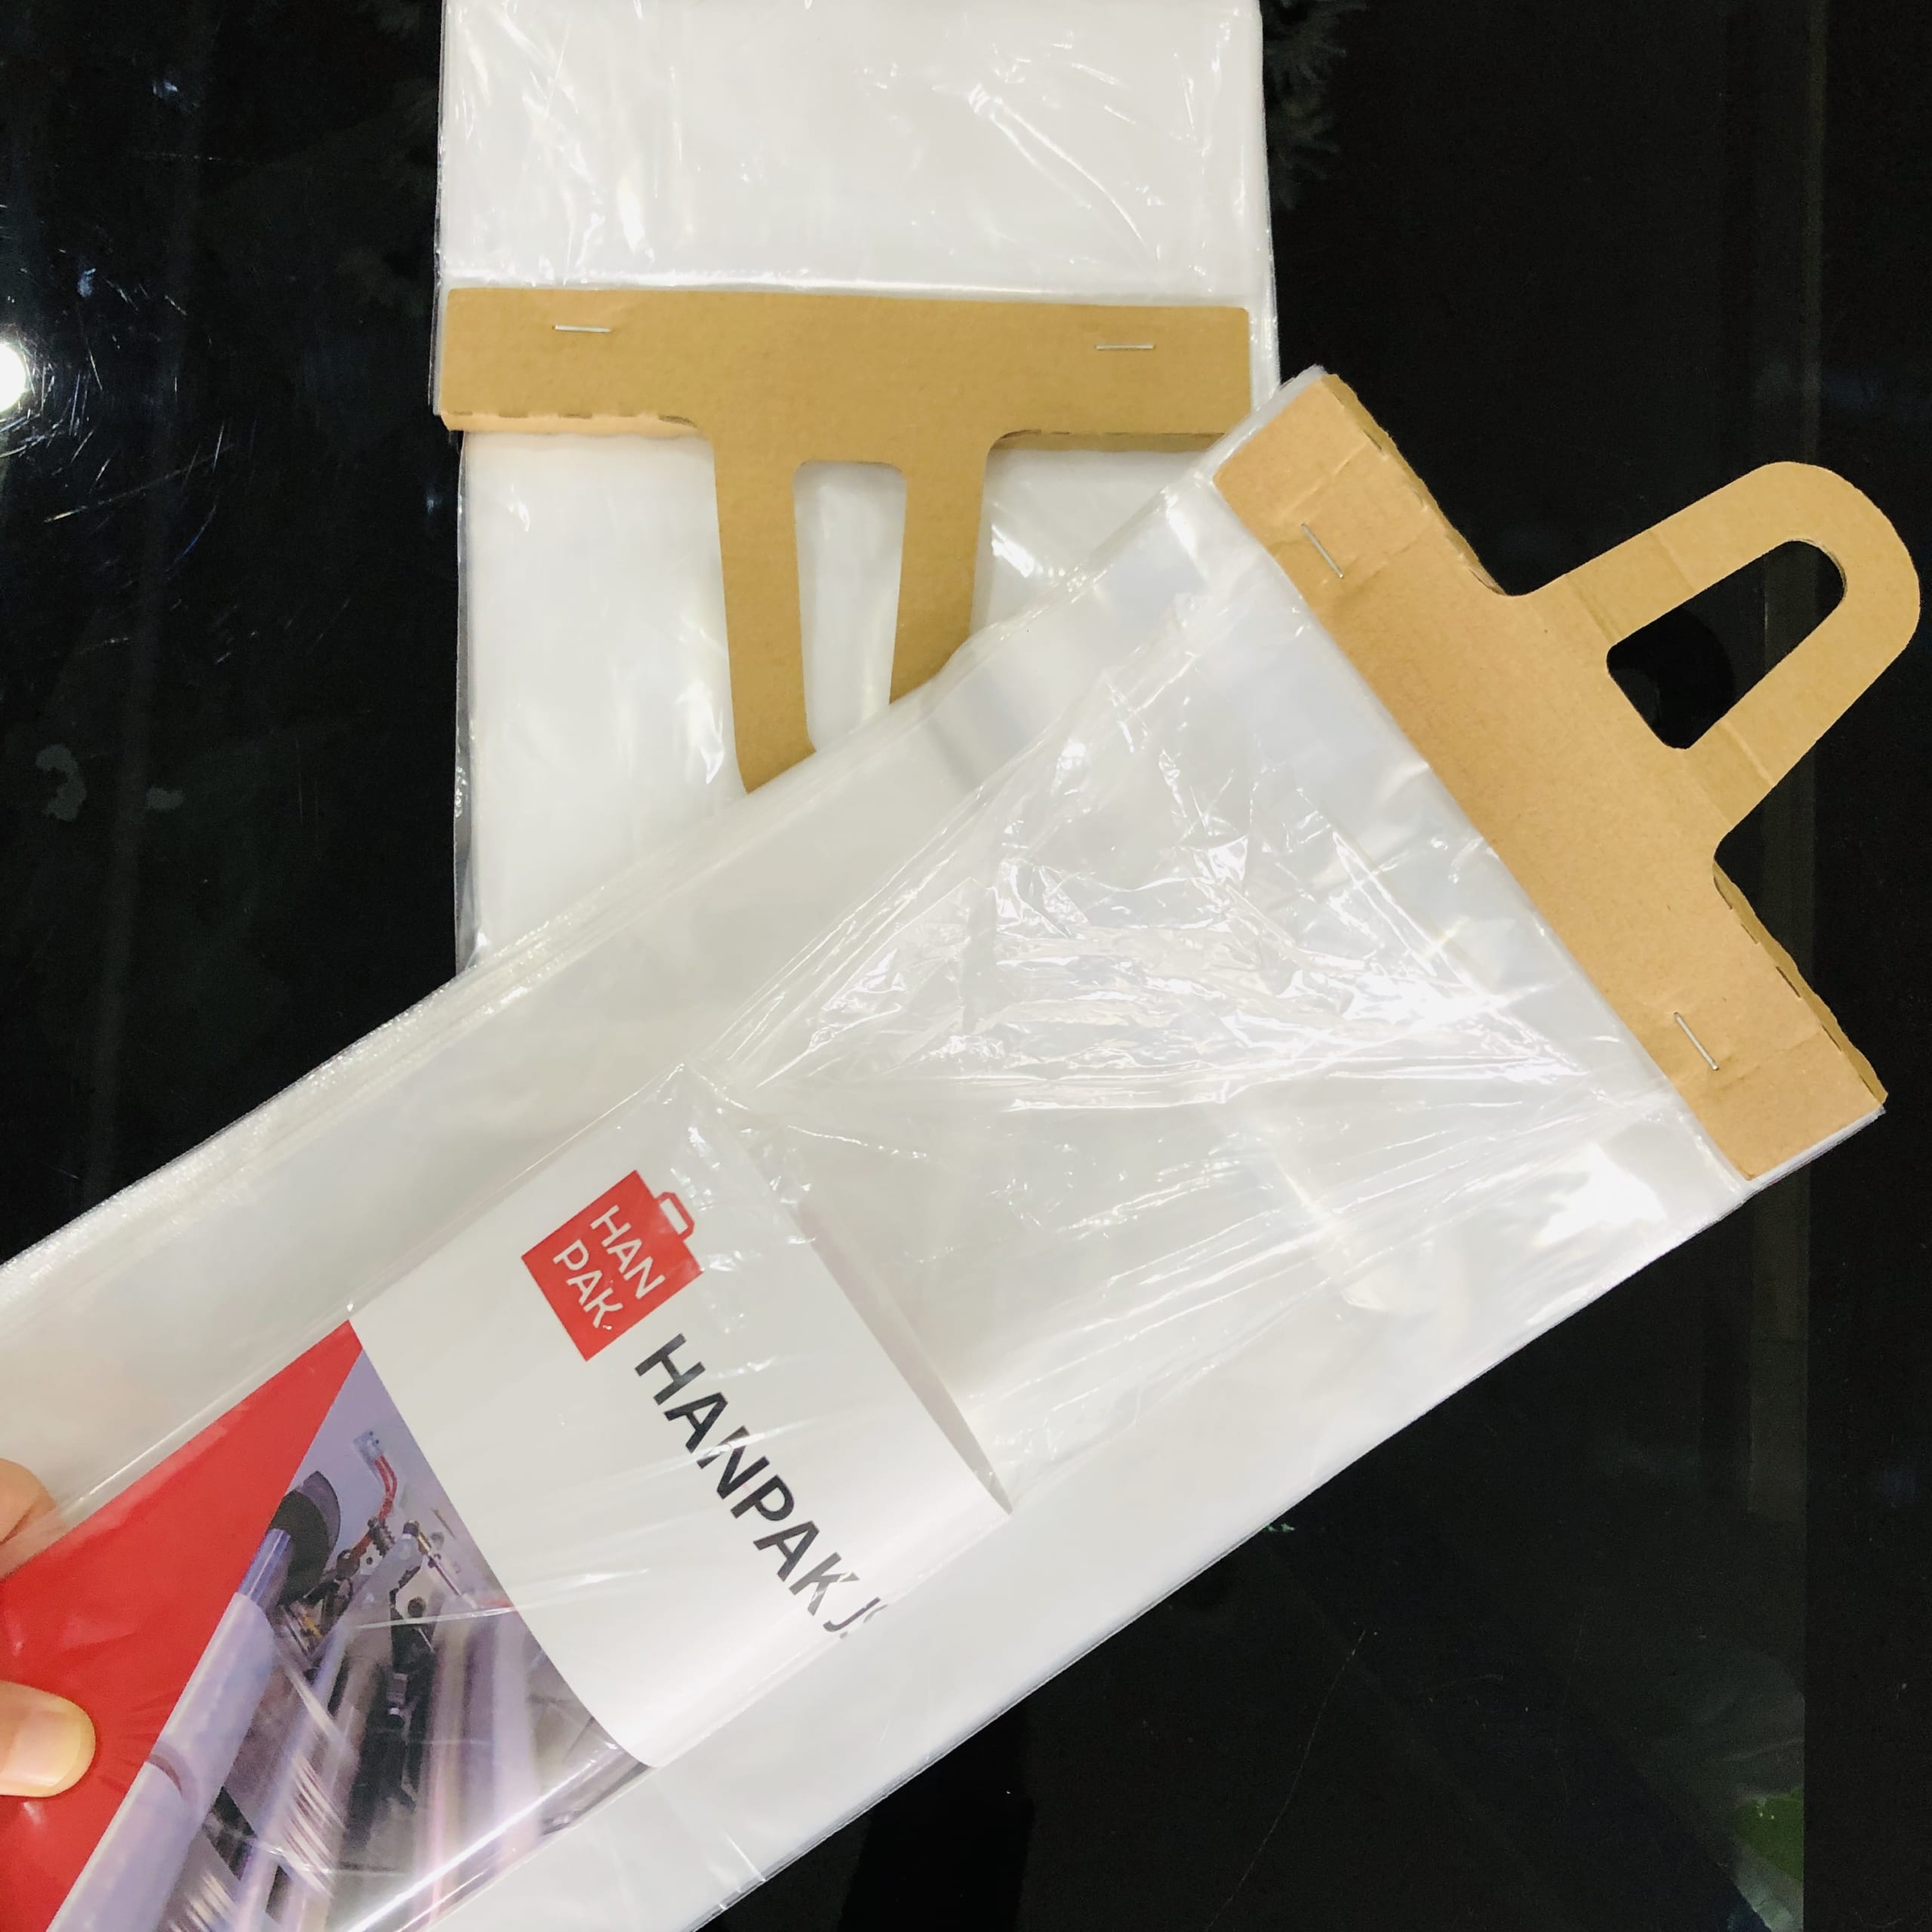 Outstanding Benefits of Clear Plastic Poly Bags – HANPAK